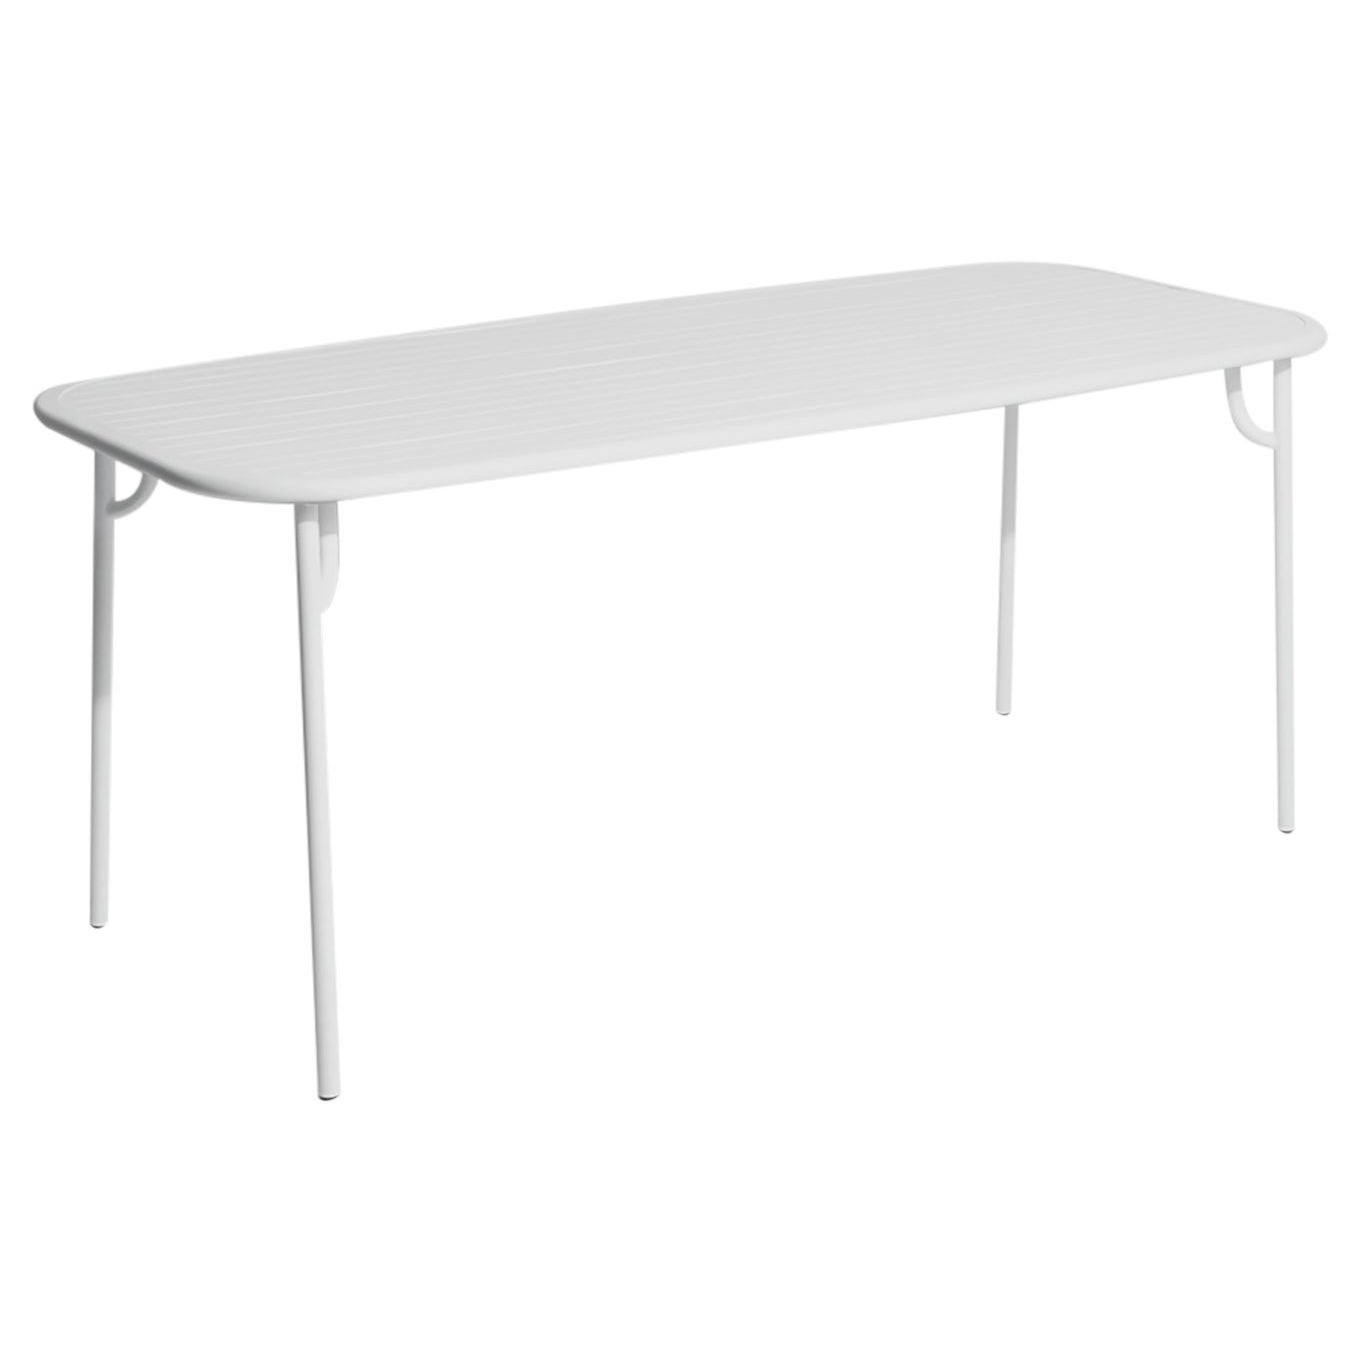 Petite Friture Week-End Medium Rectangular Dining Table in Pearl Grey with Slats